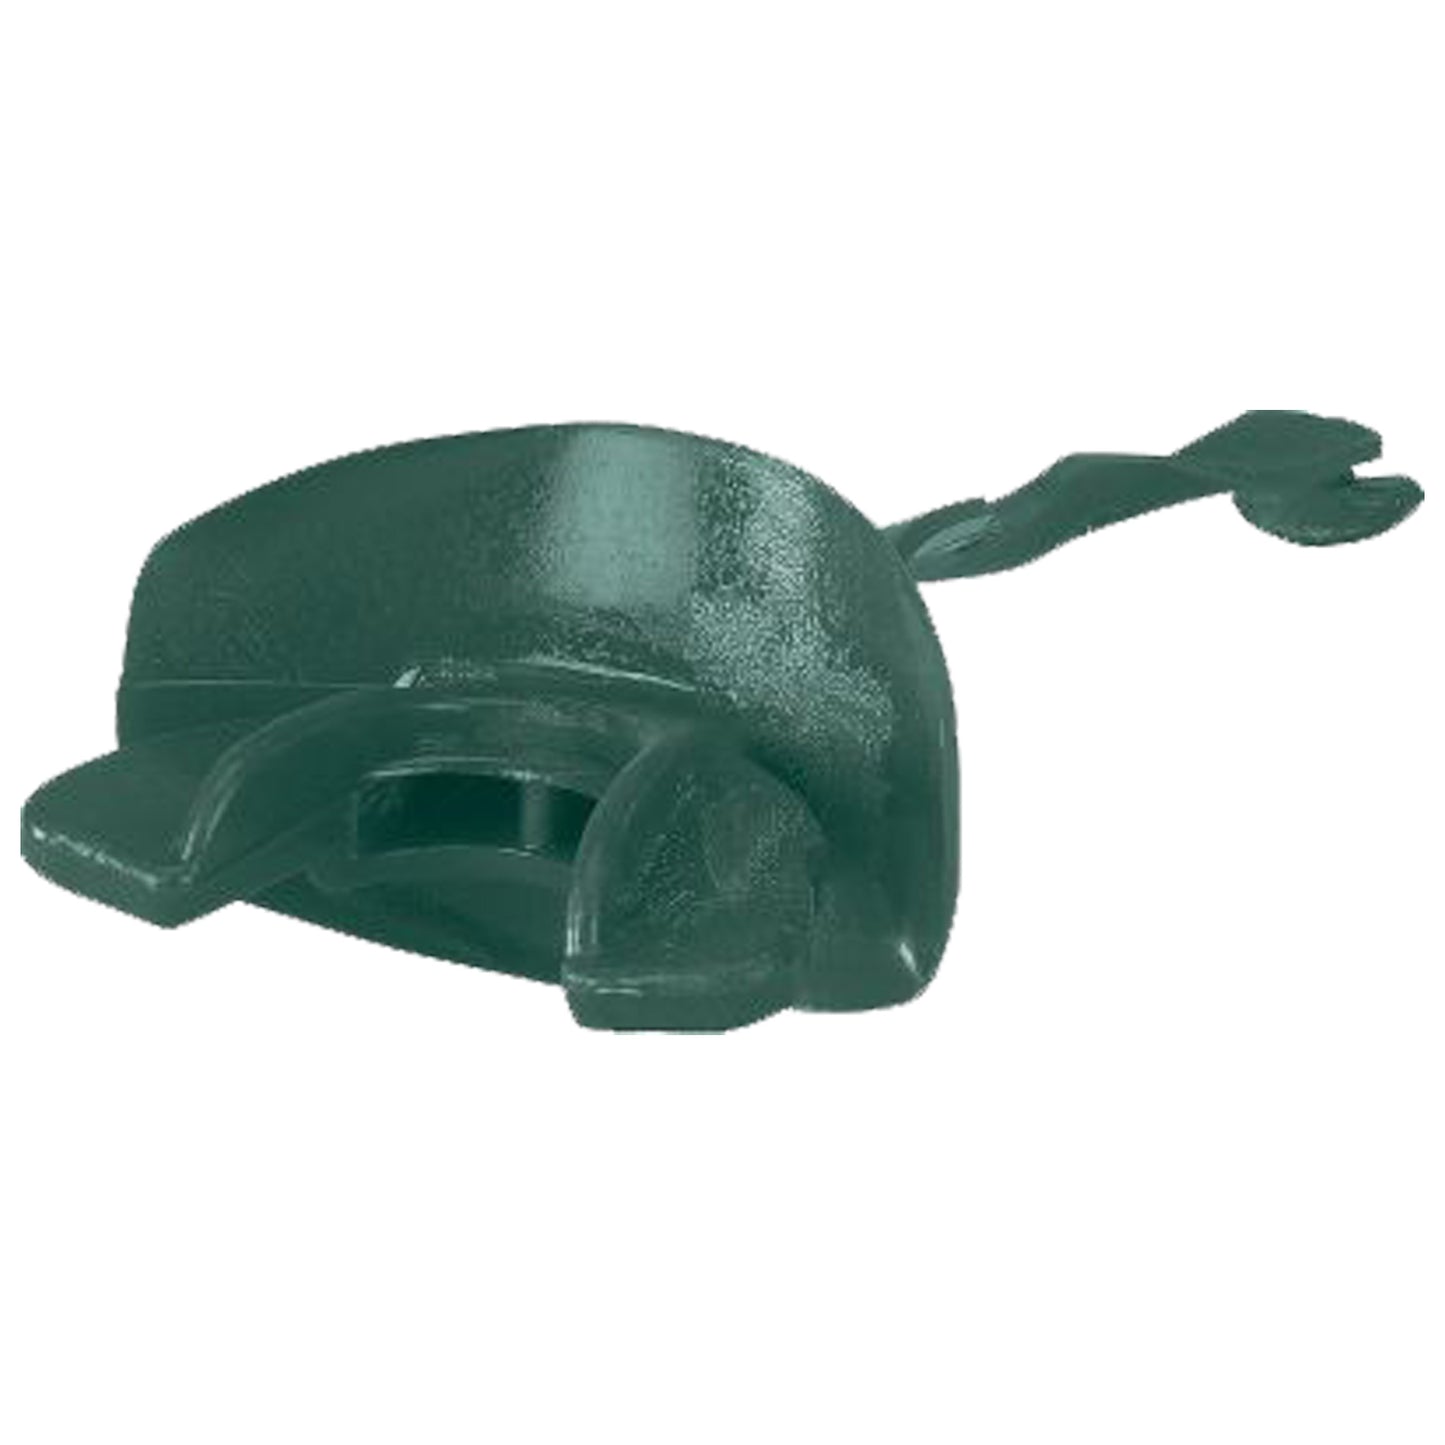 Vettex Doublegaurd Mouthguard with Lip Protector - Dark Green